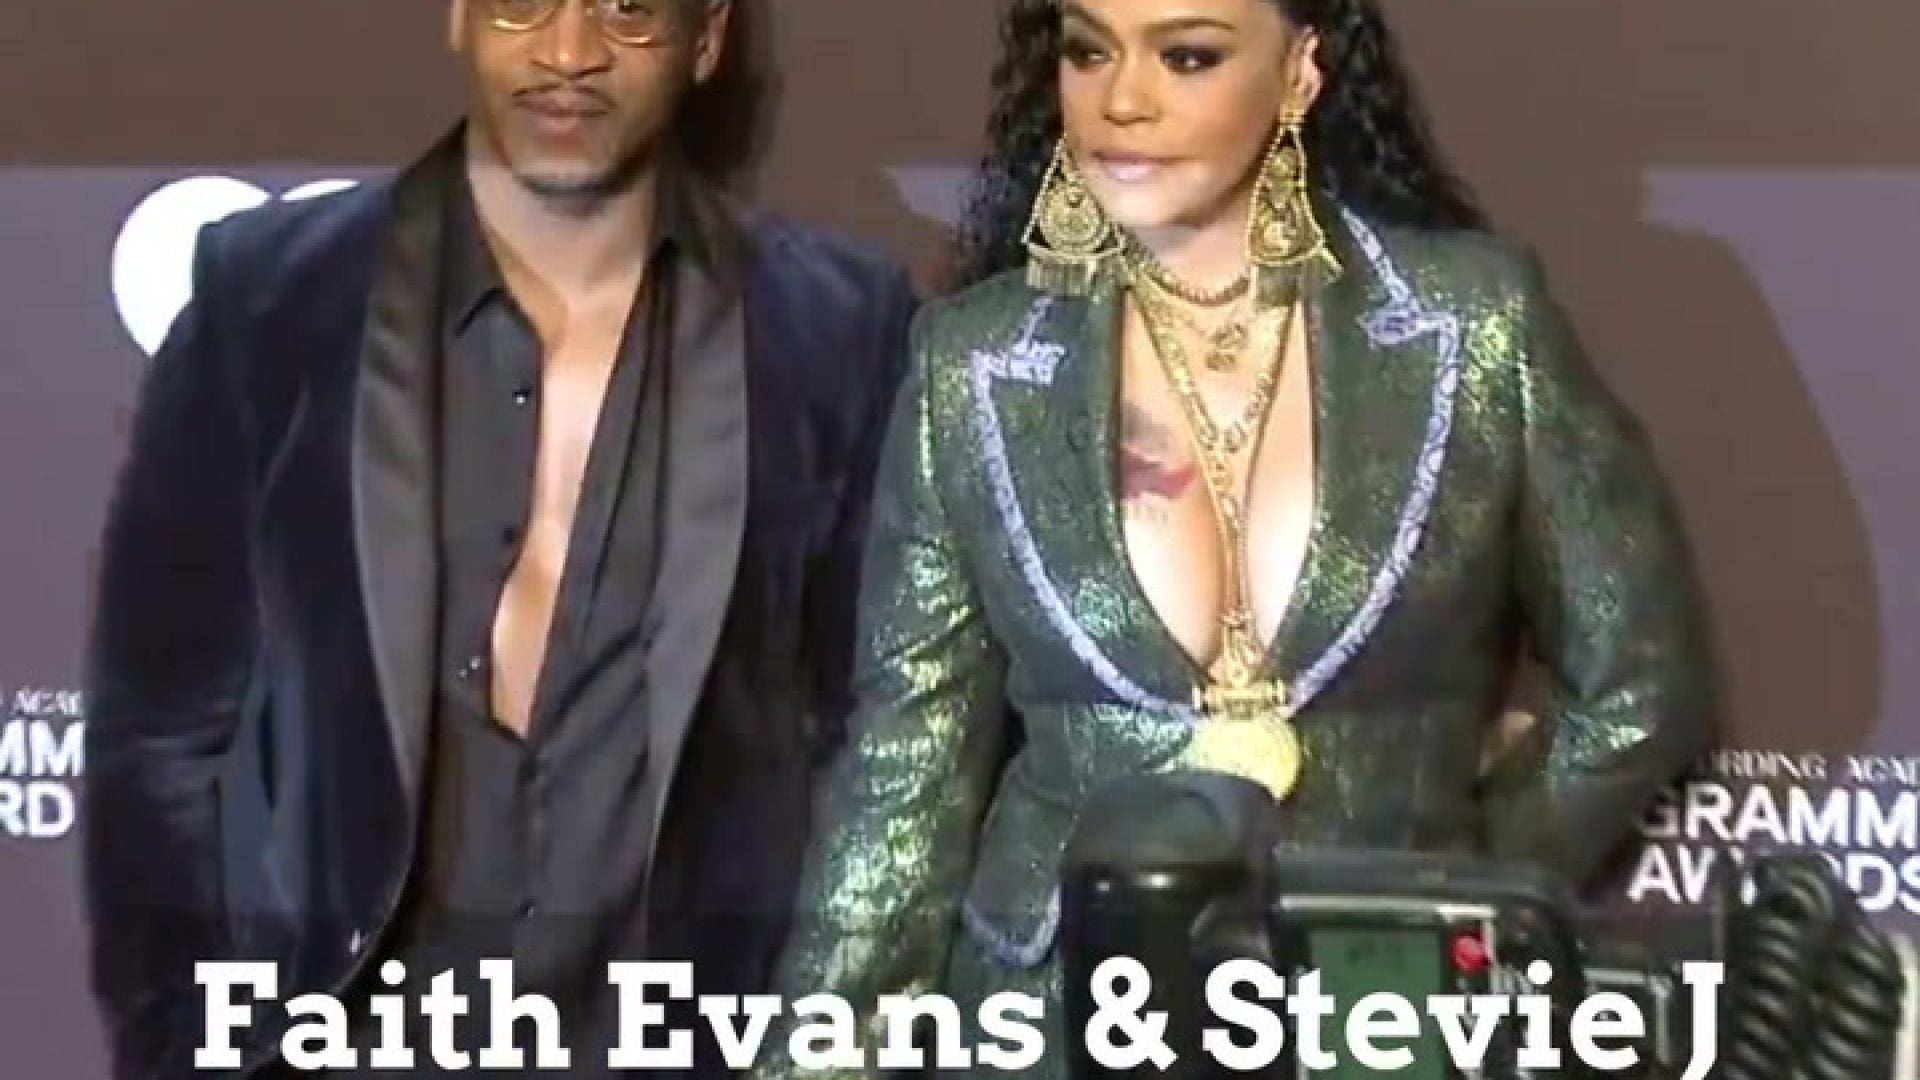 Faith Evans And Stevie J: A Timeline Of Their Relationship